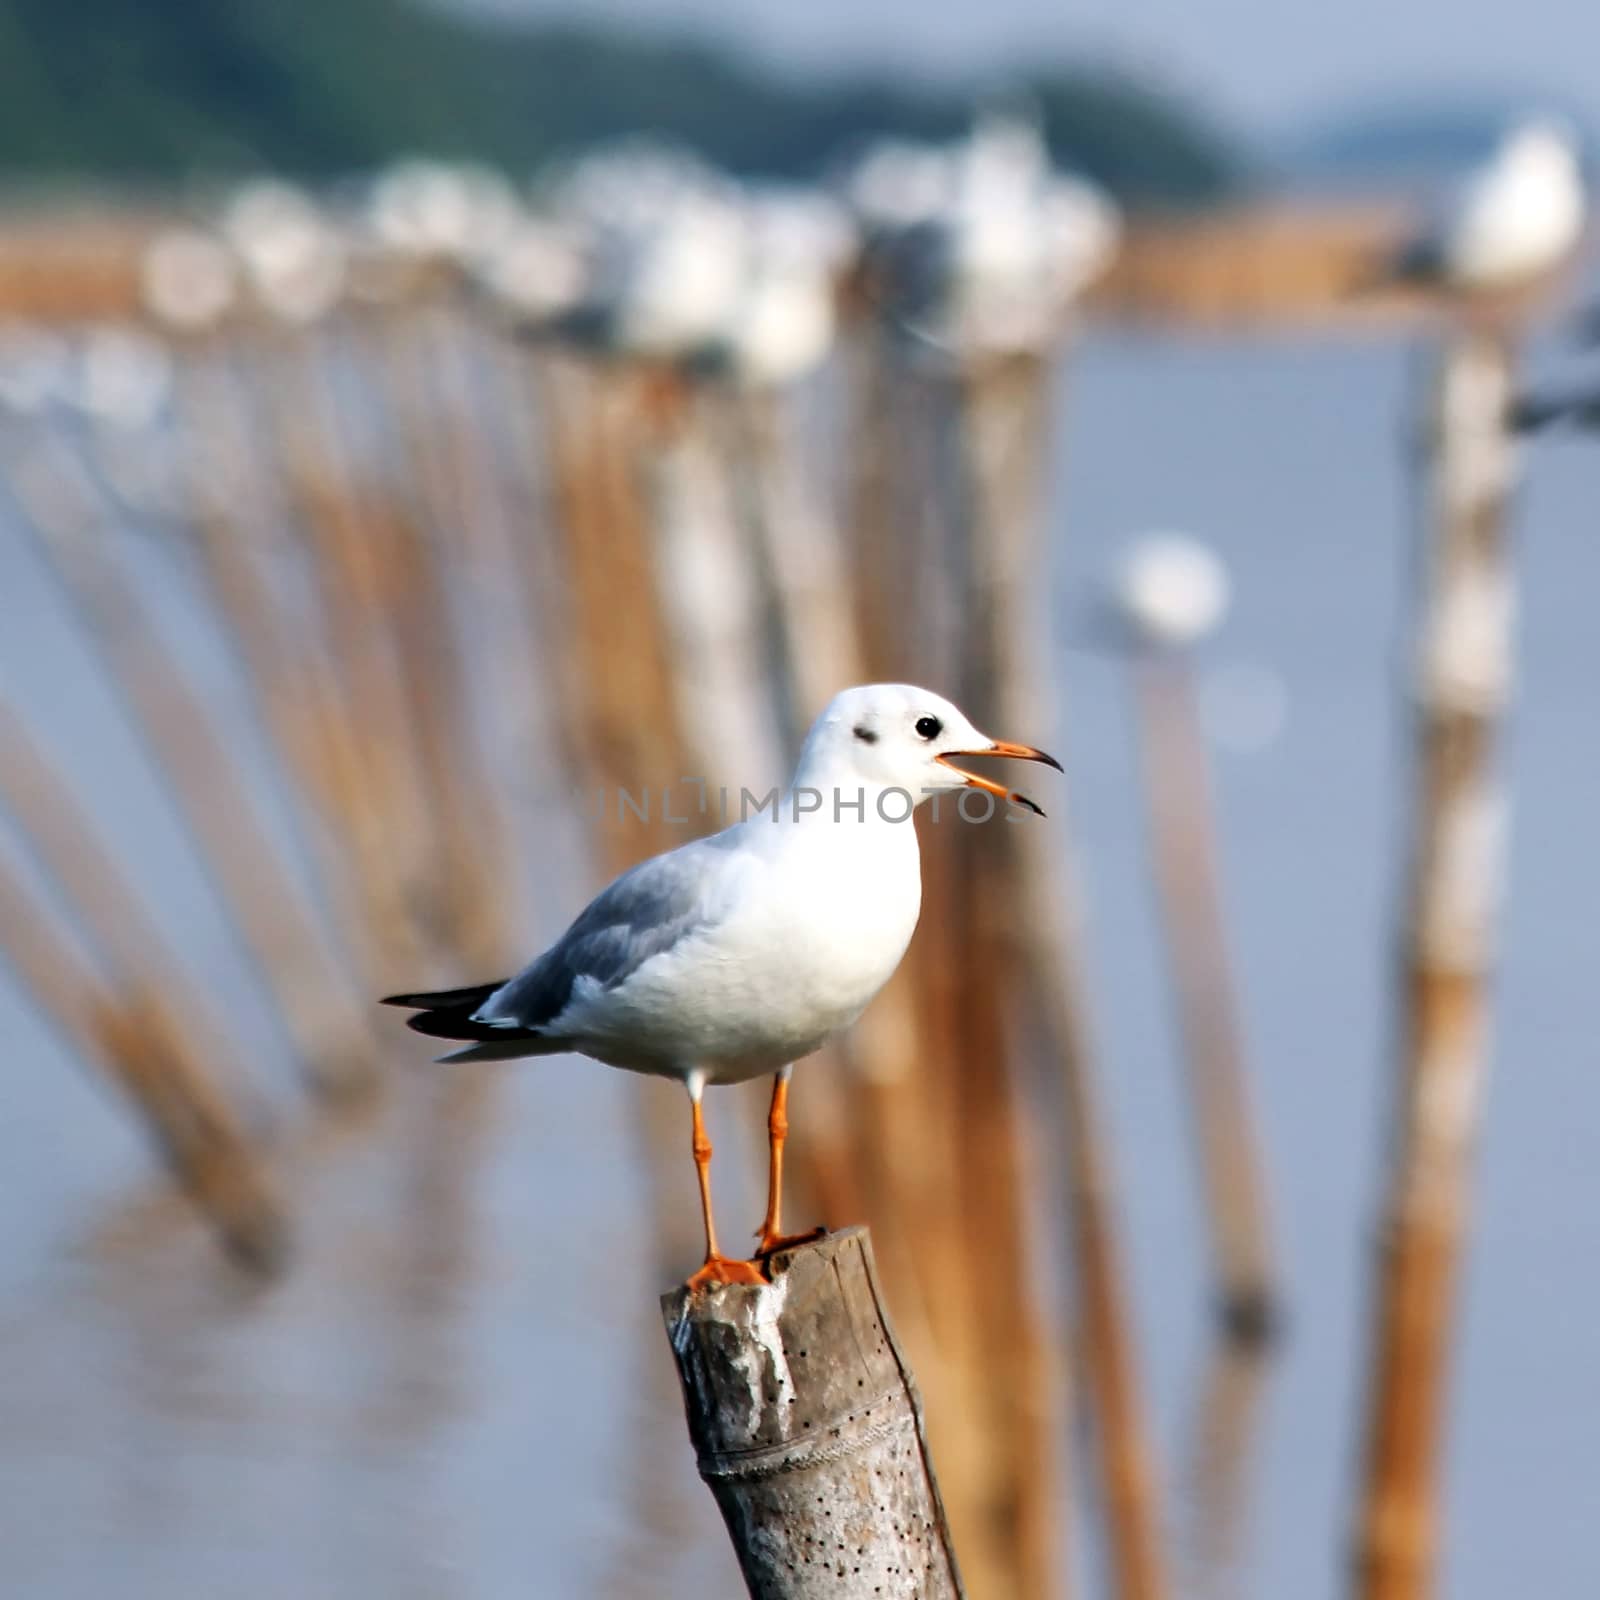 Seagull sitting on a pole by leisuretime70